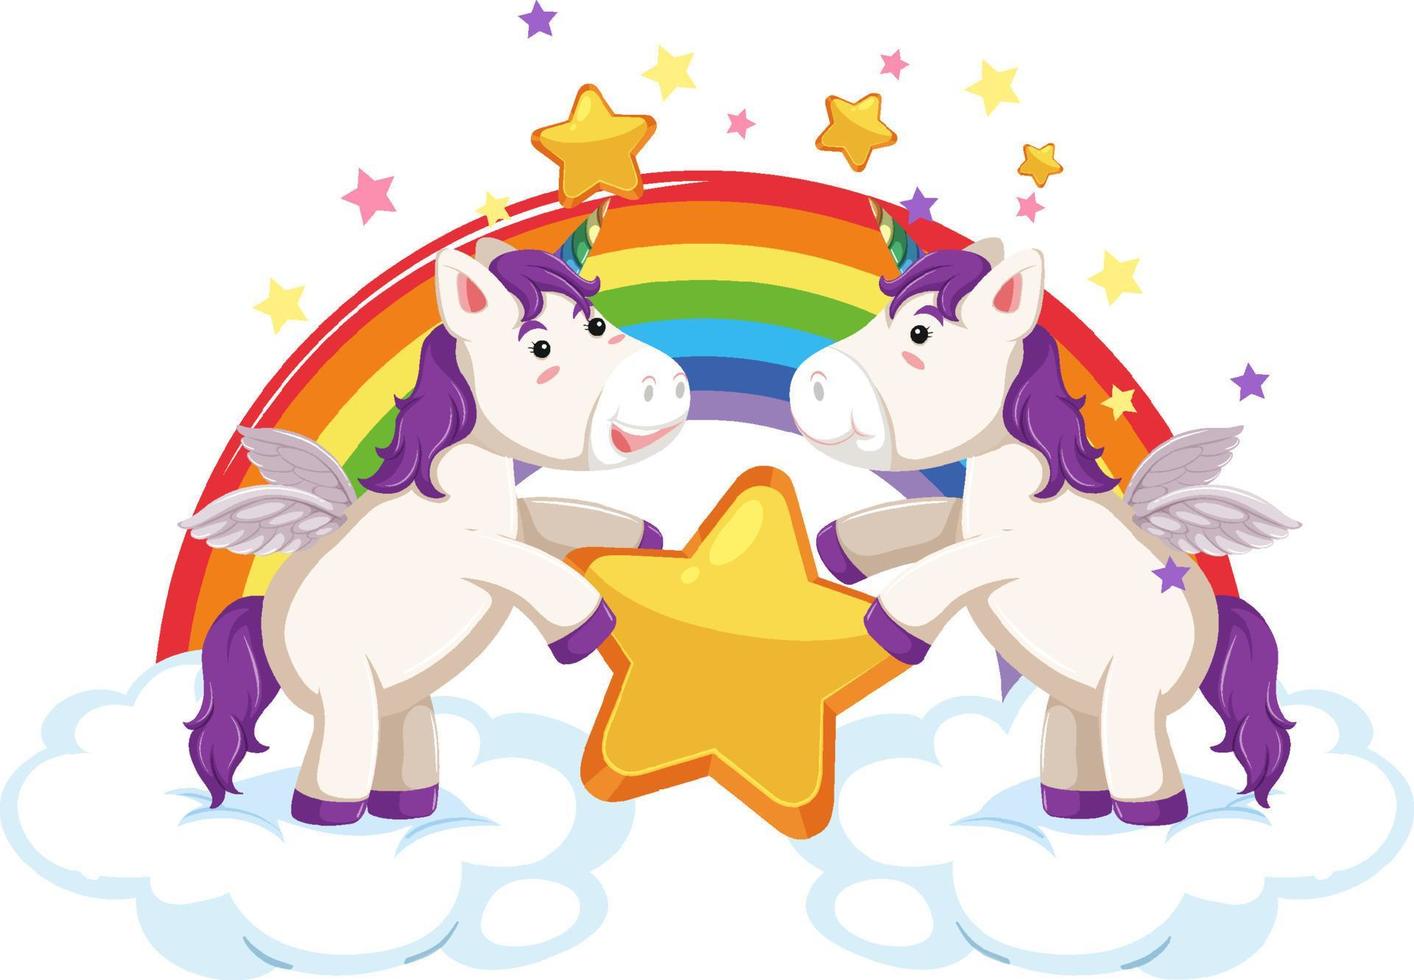 Two cute unicorns holding a star together vector